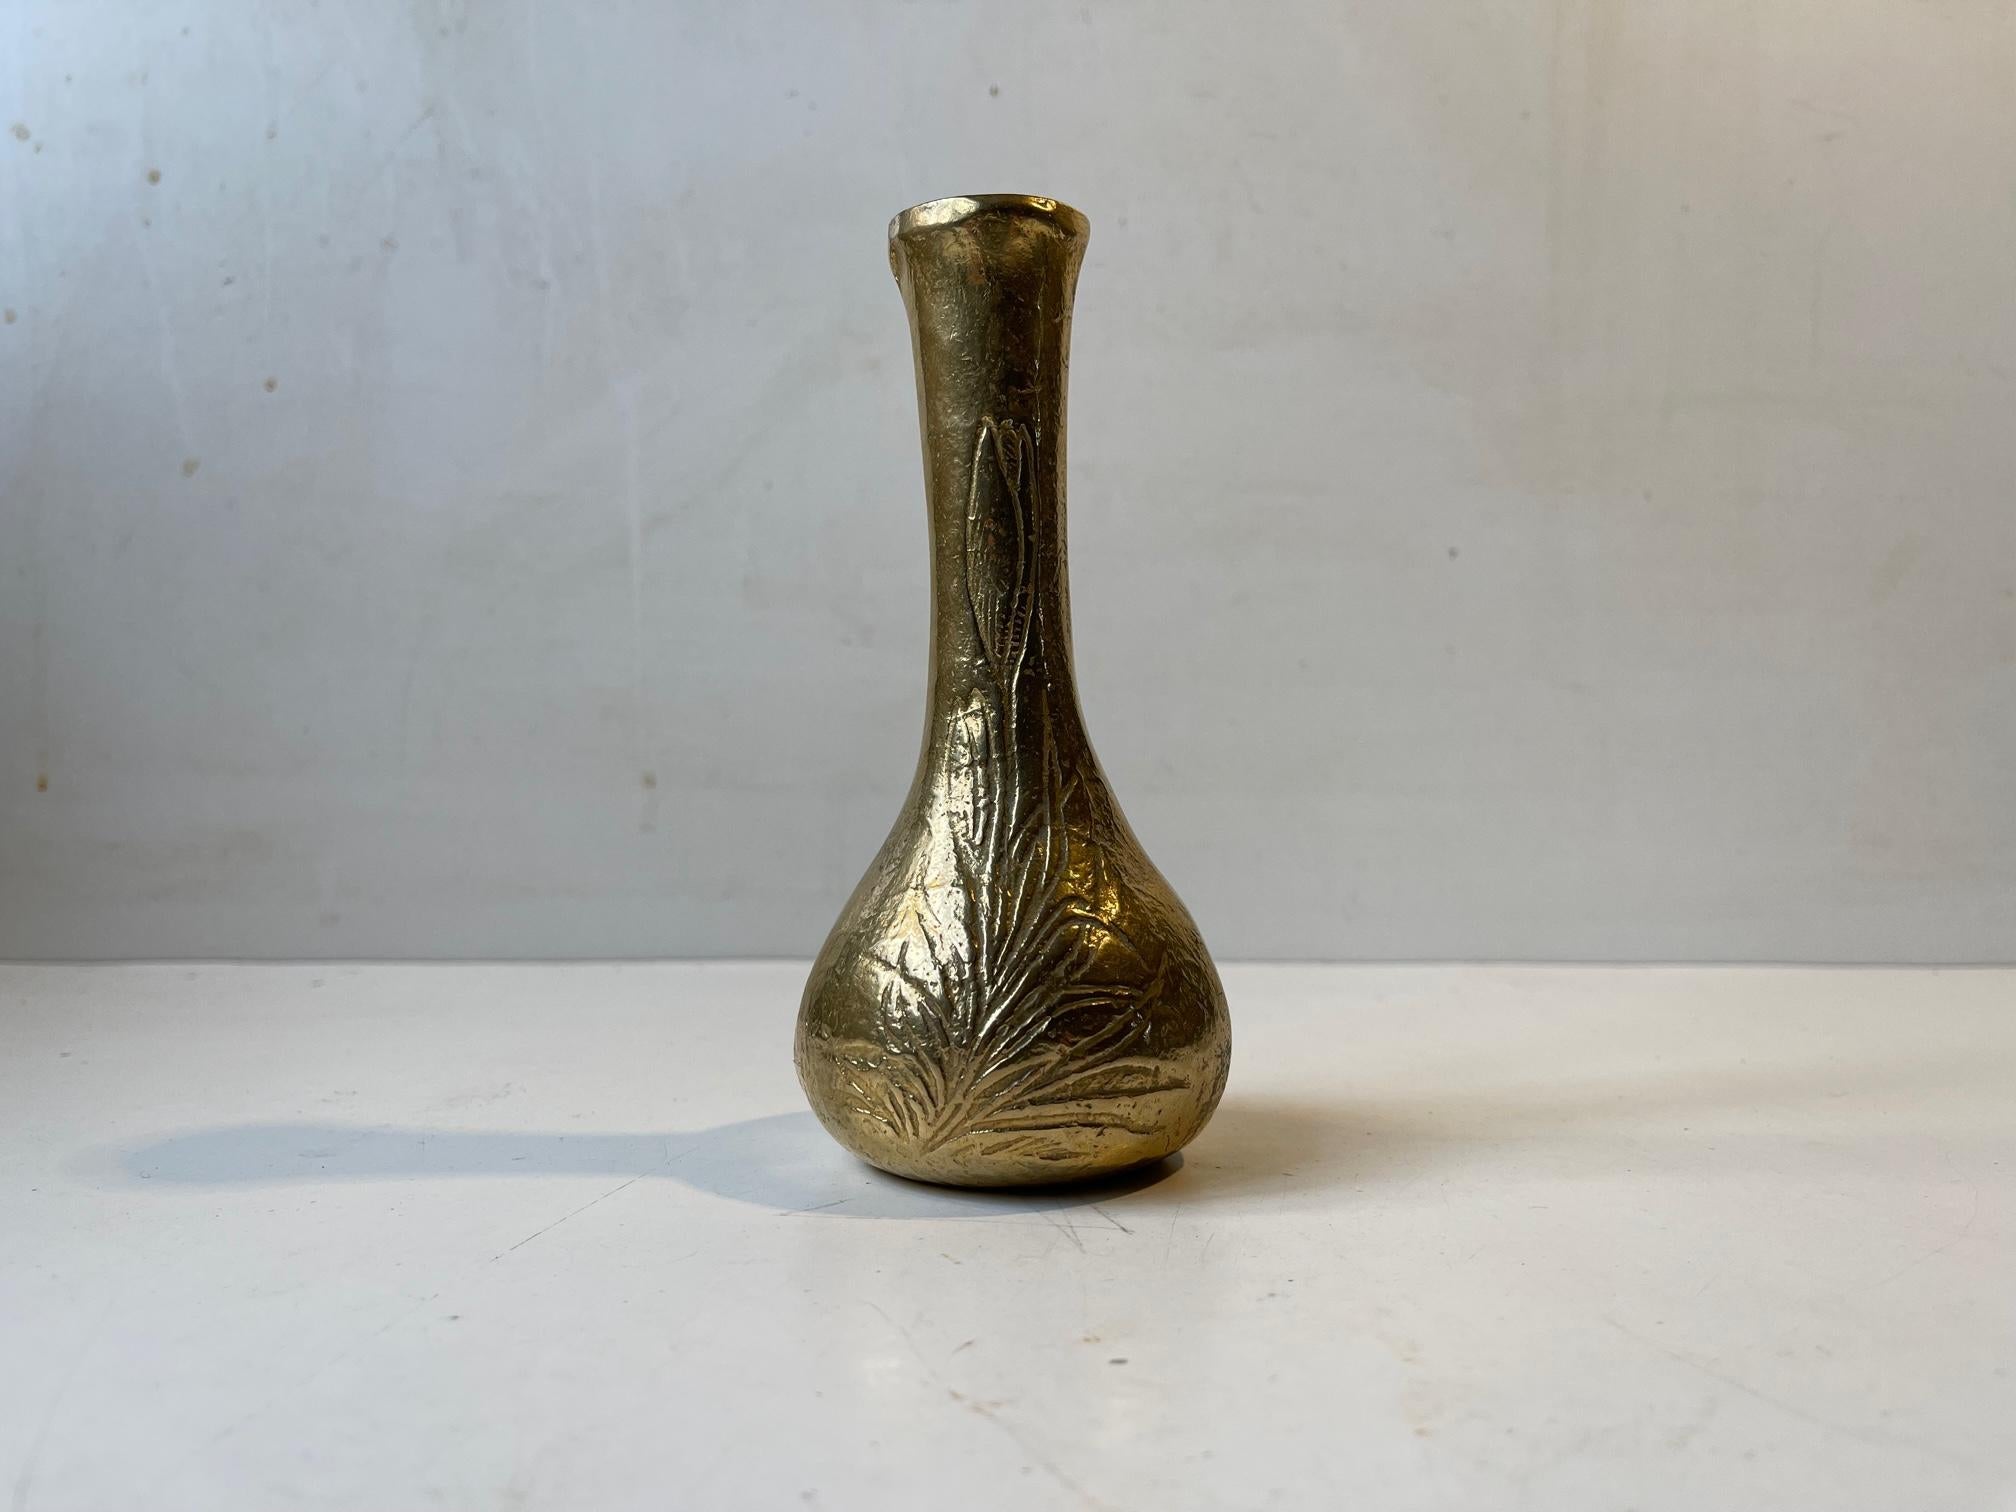 Unusual heavy gilt bronze bud vase with hand etched floral motif. Probably made in Japan circa 1920-30. Please notice that it tilts slightly to one side. It has an authentic almost primitive vibe to it. No markings. Measurements: H: 15 cm, D: 7/3 cm.